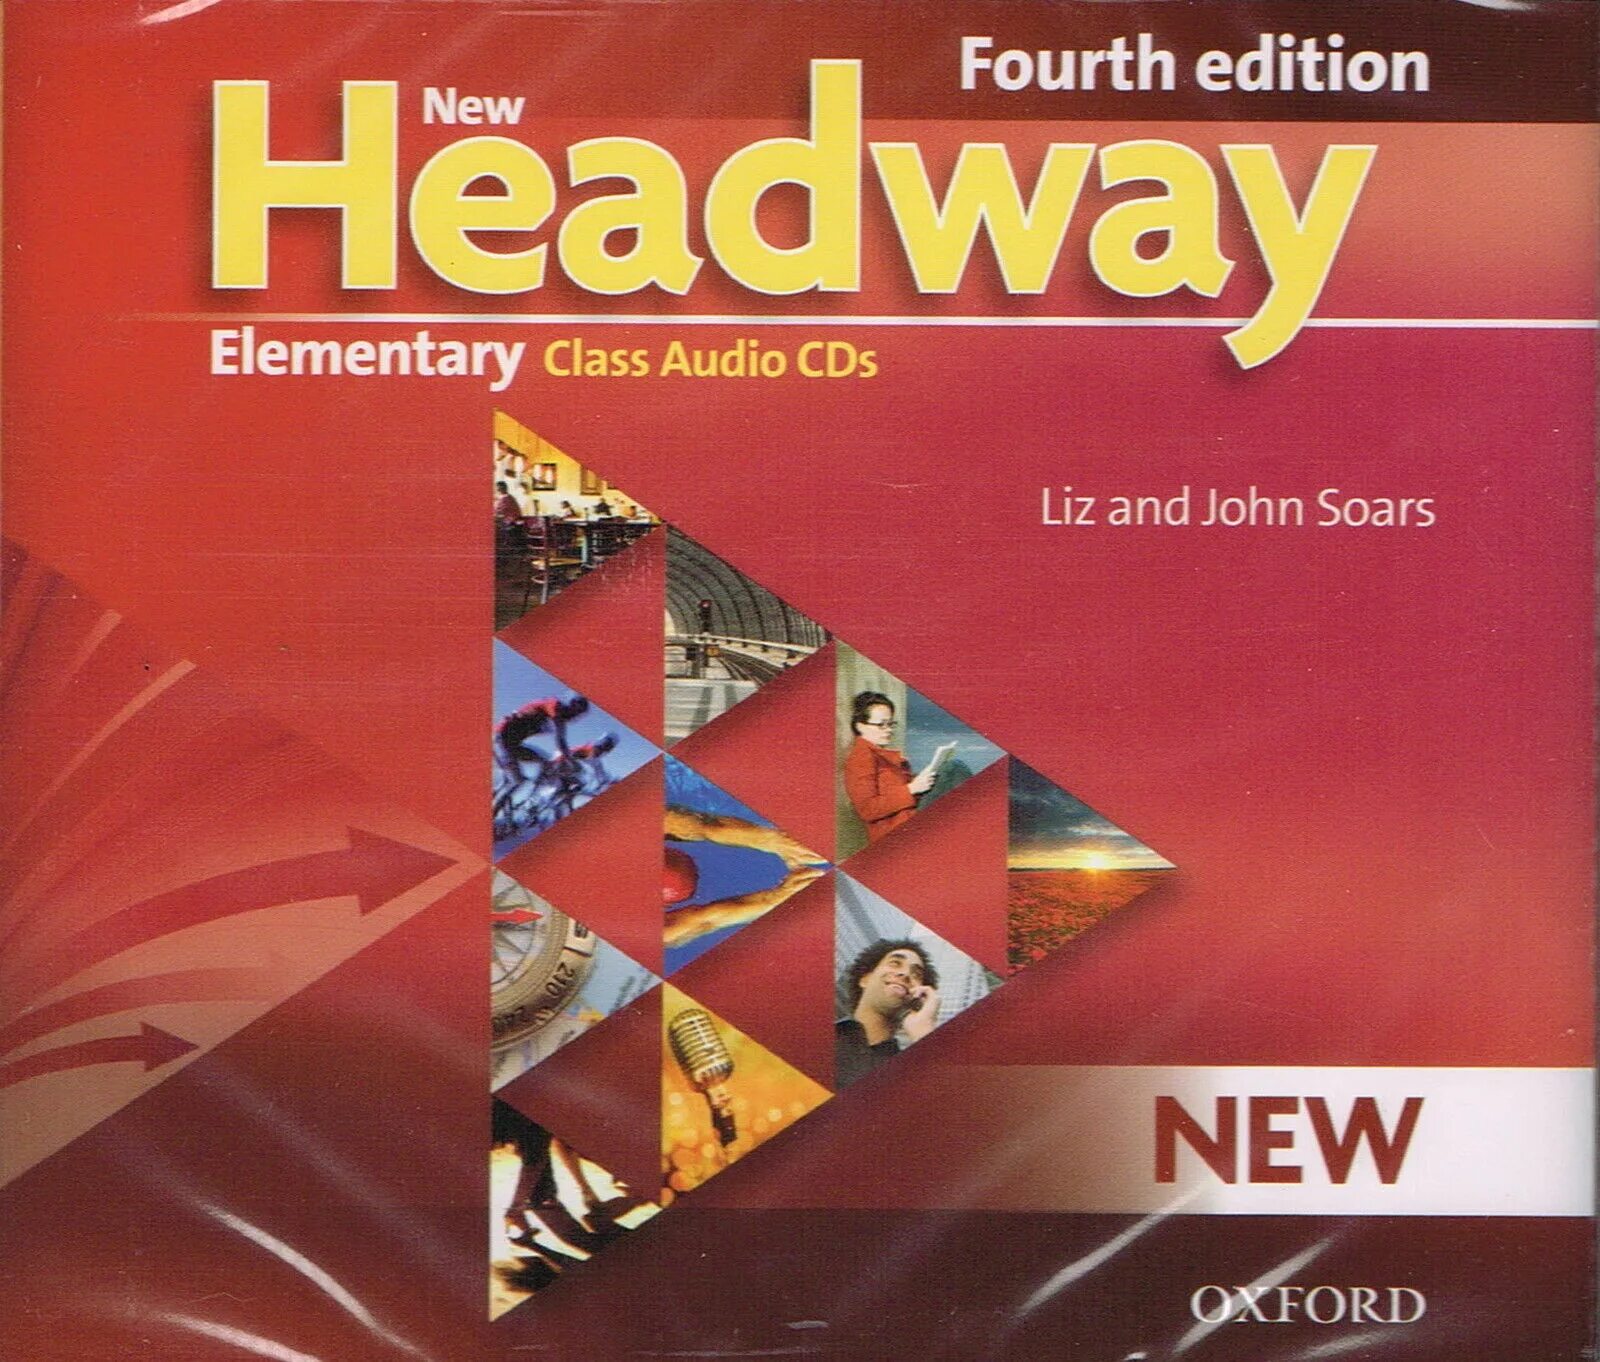 Headway Elementary 4th Edition. New Headway 4th Edition. Тест Headway Elementary 4 Edition. Headway Elementary 4th Edition Audio.